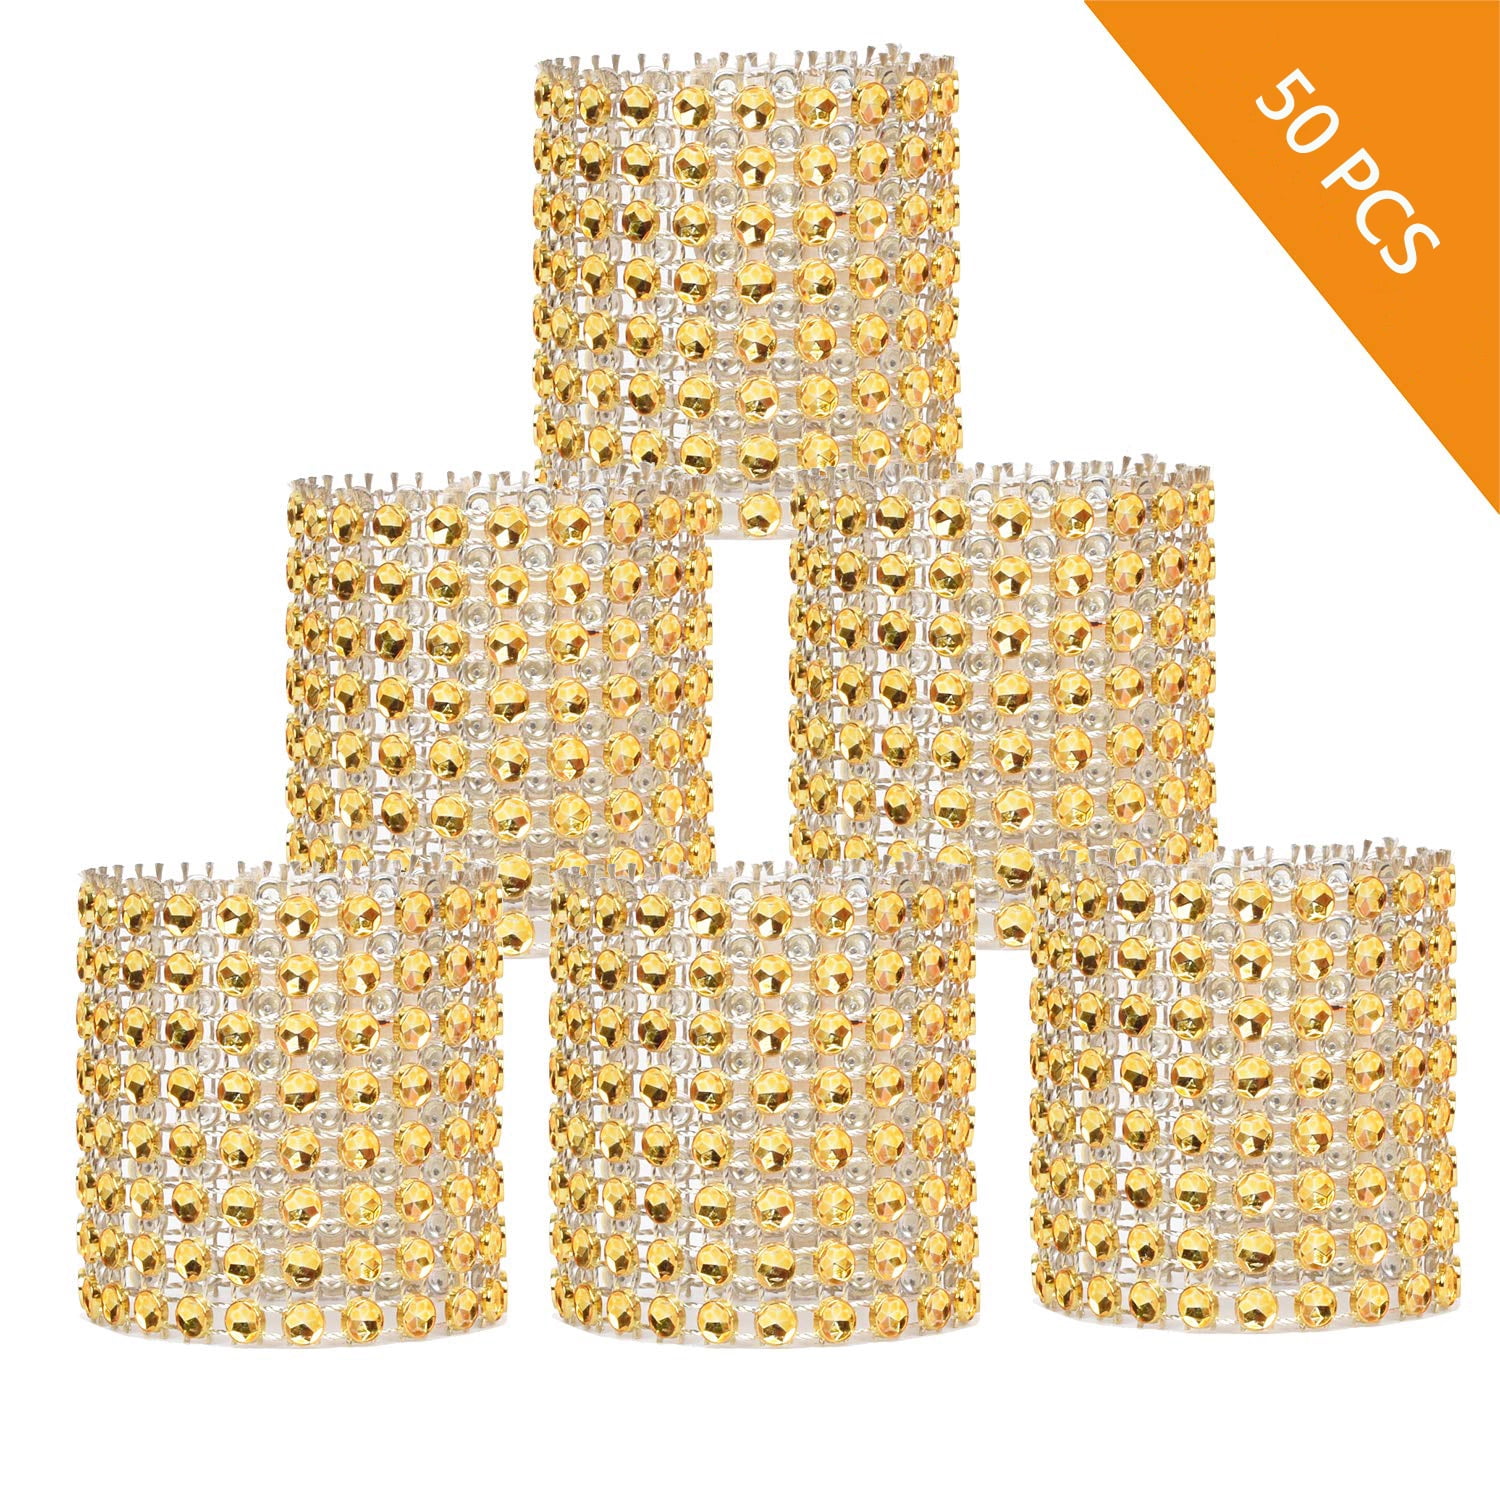 Handmade Gold Square Mesh Napkin Rings Holder for Dinning Table Parties Everyday